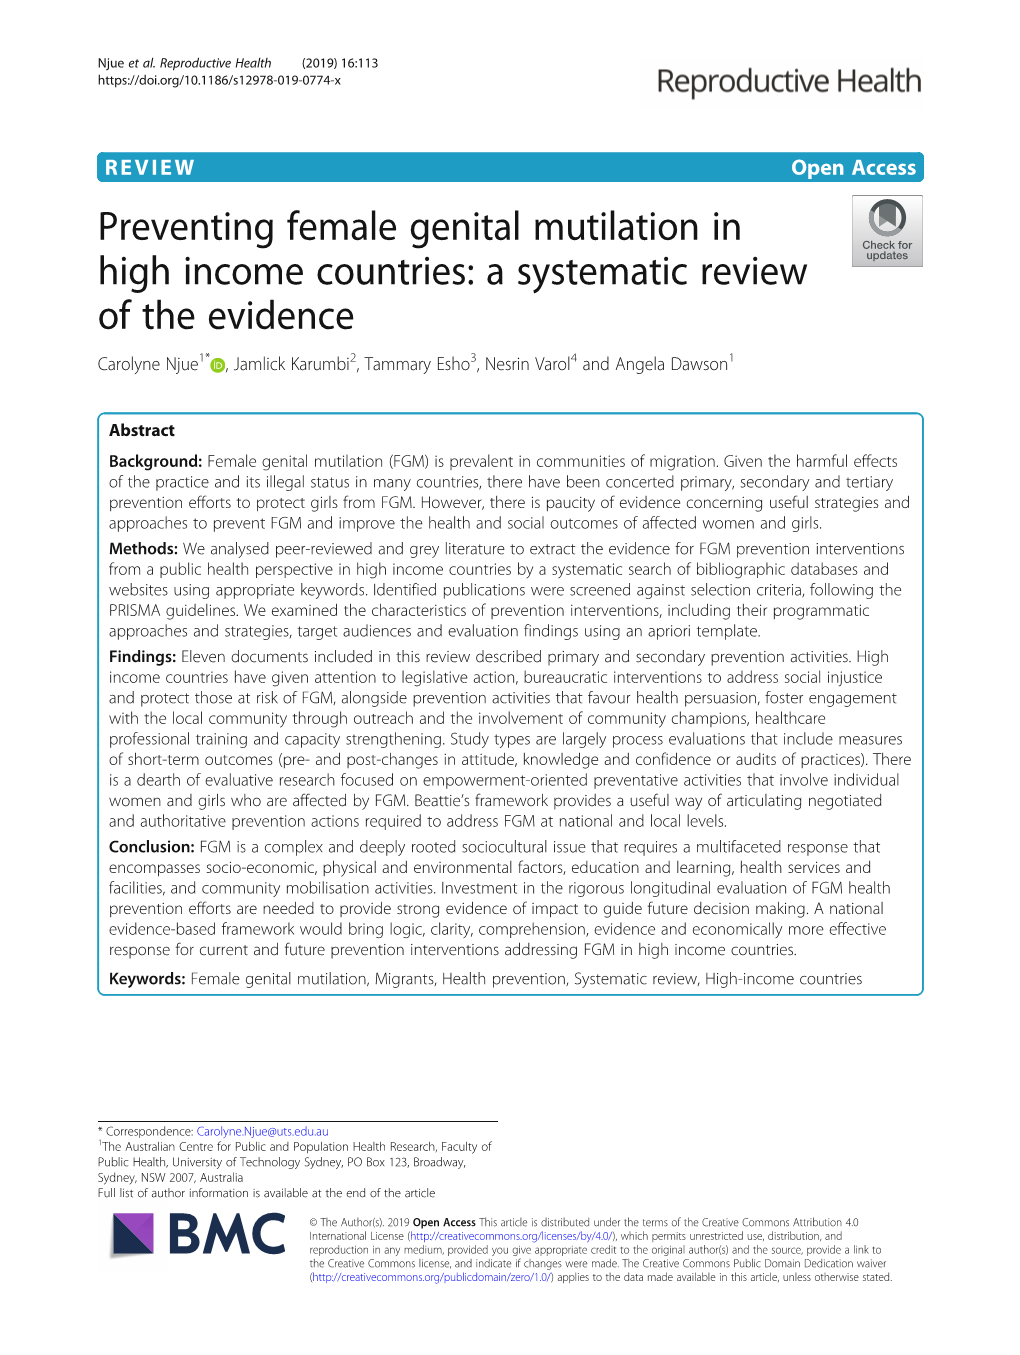 Preventing Female Genital Mutilation in High Income Countries